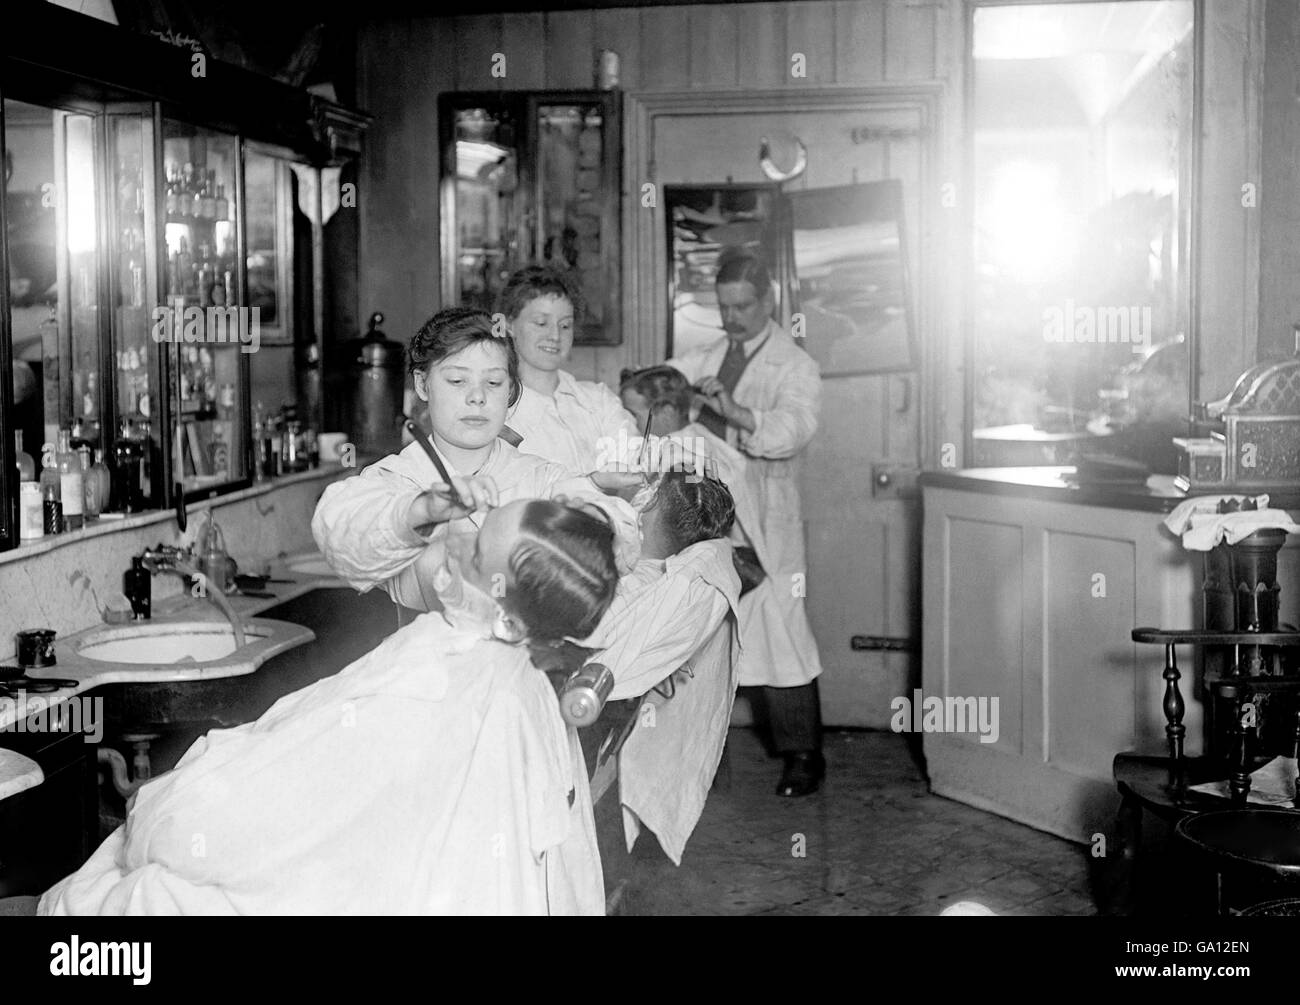 A fifteen year old girl works in a barber's shop near to Waterloo Station. Women were encouraged to take on roles traditionally reserved for men, as many of the men were away fighting in the trenches. Stock Photo